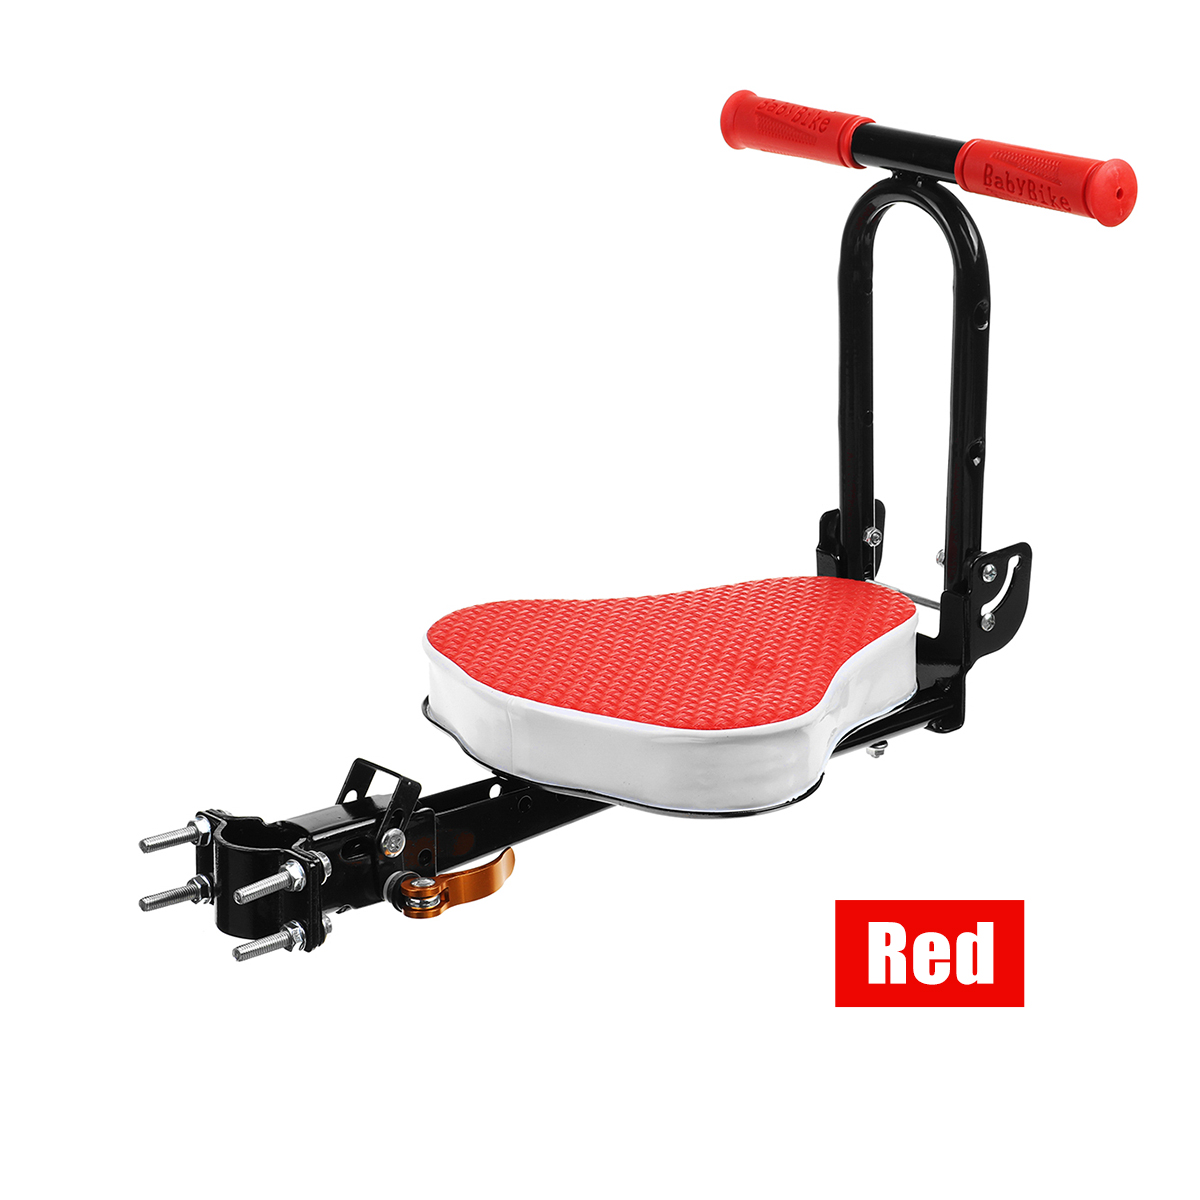 Black/Red Quick Dismounting Safety Seat for Electric Car /Bicycle Children Kids